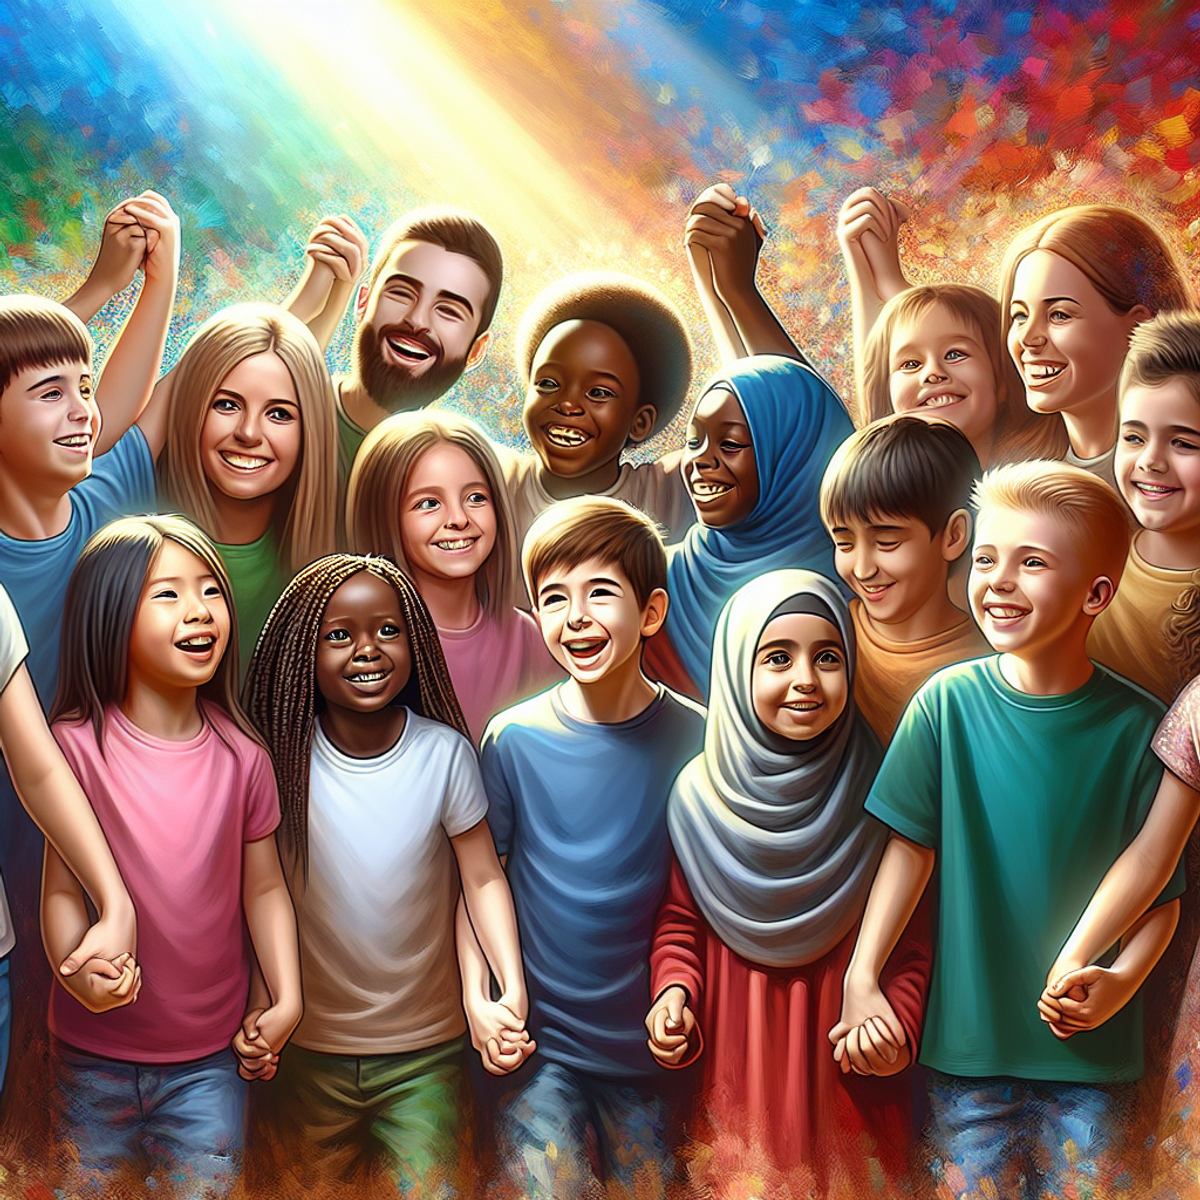 A group of smiling children of diverse ethnicities holding hands in unity against a colorful background.